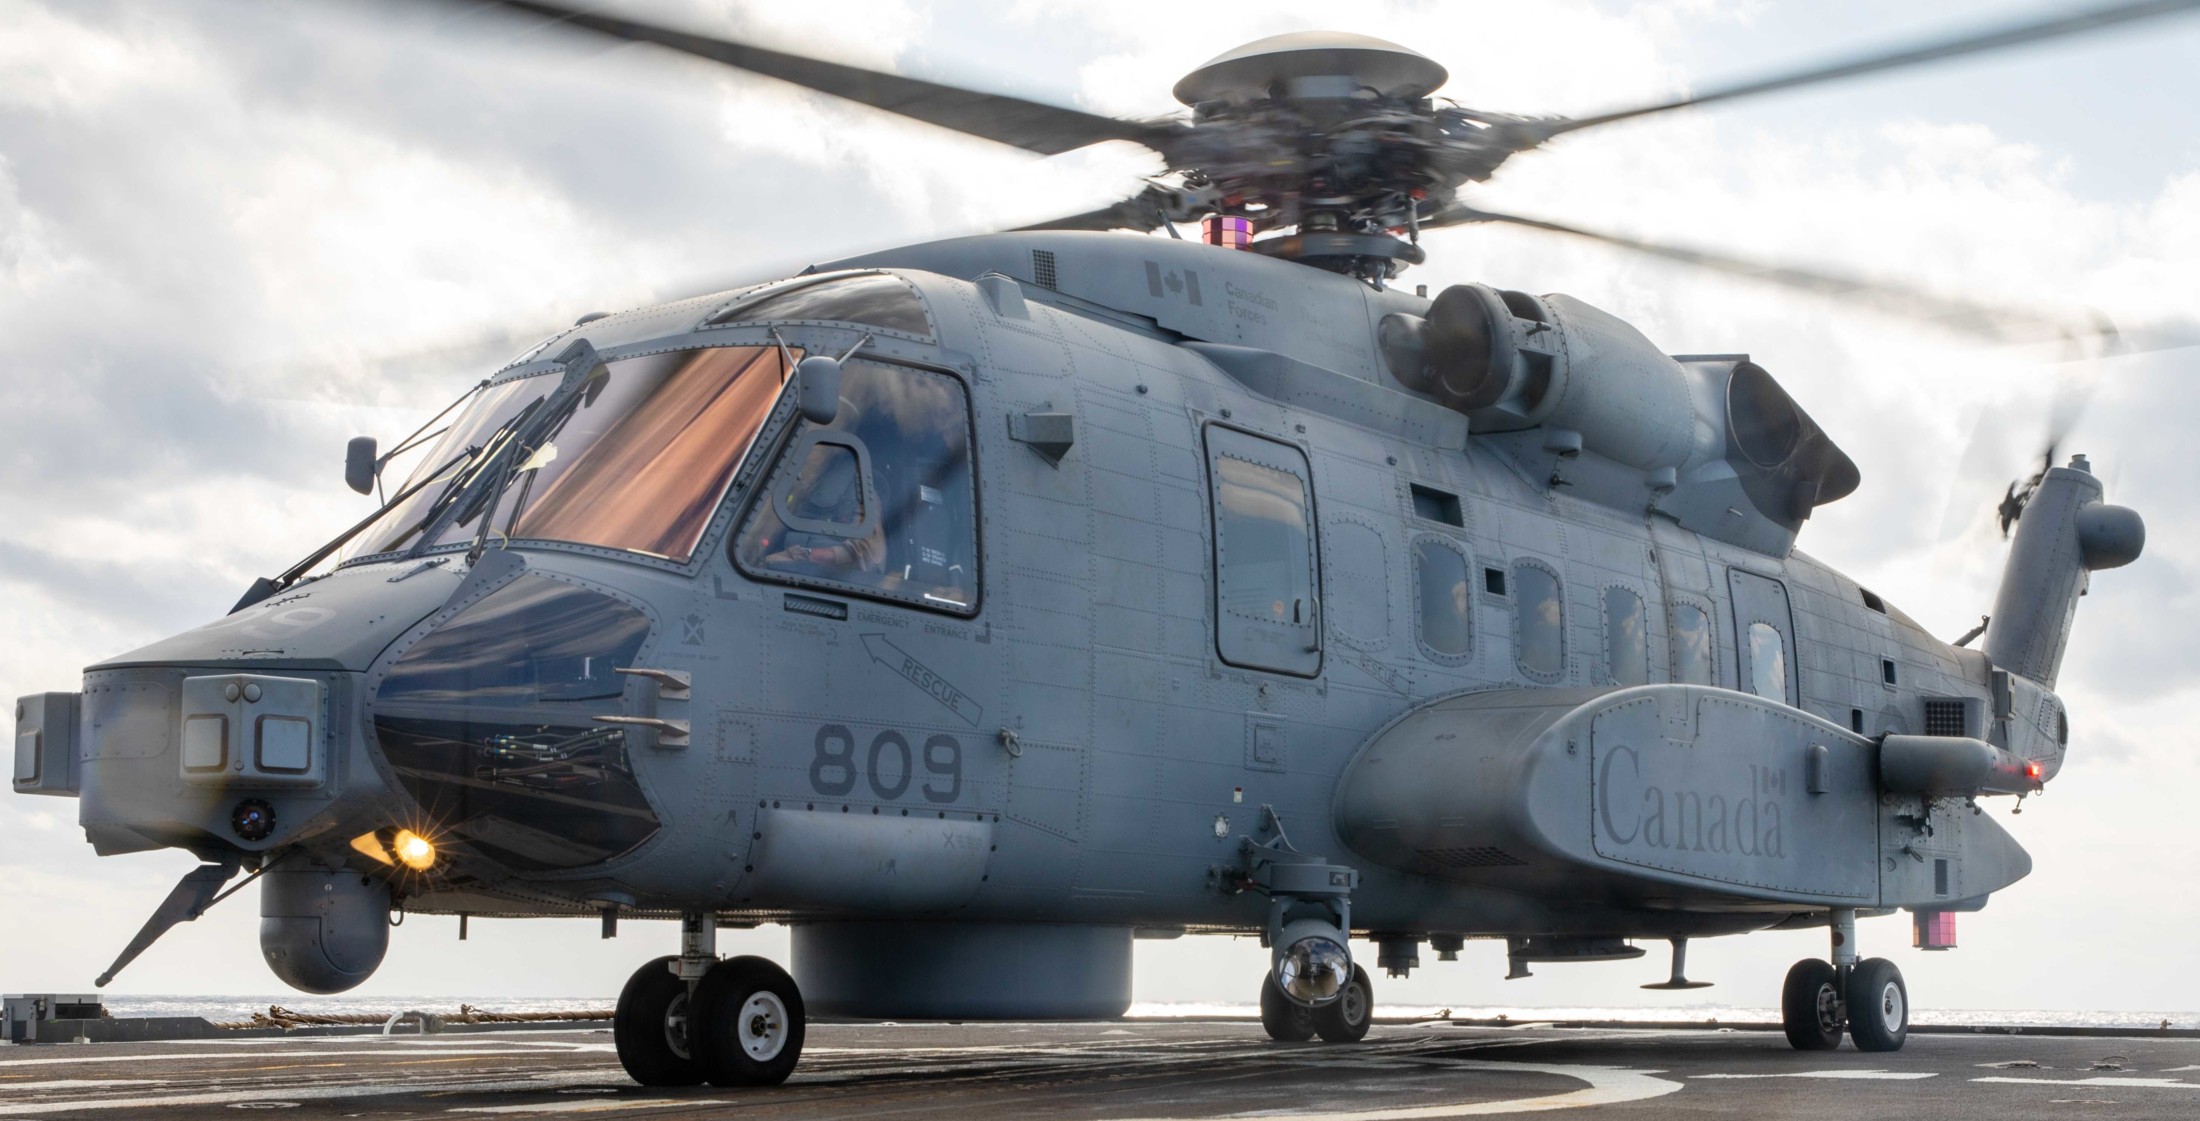 ch-148 cyclone naval helicopter royal canadian air force navy rcaf sikorsky hmcs 406 423 443 maritime squadron 11